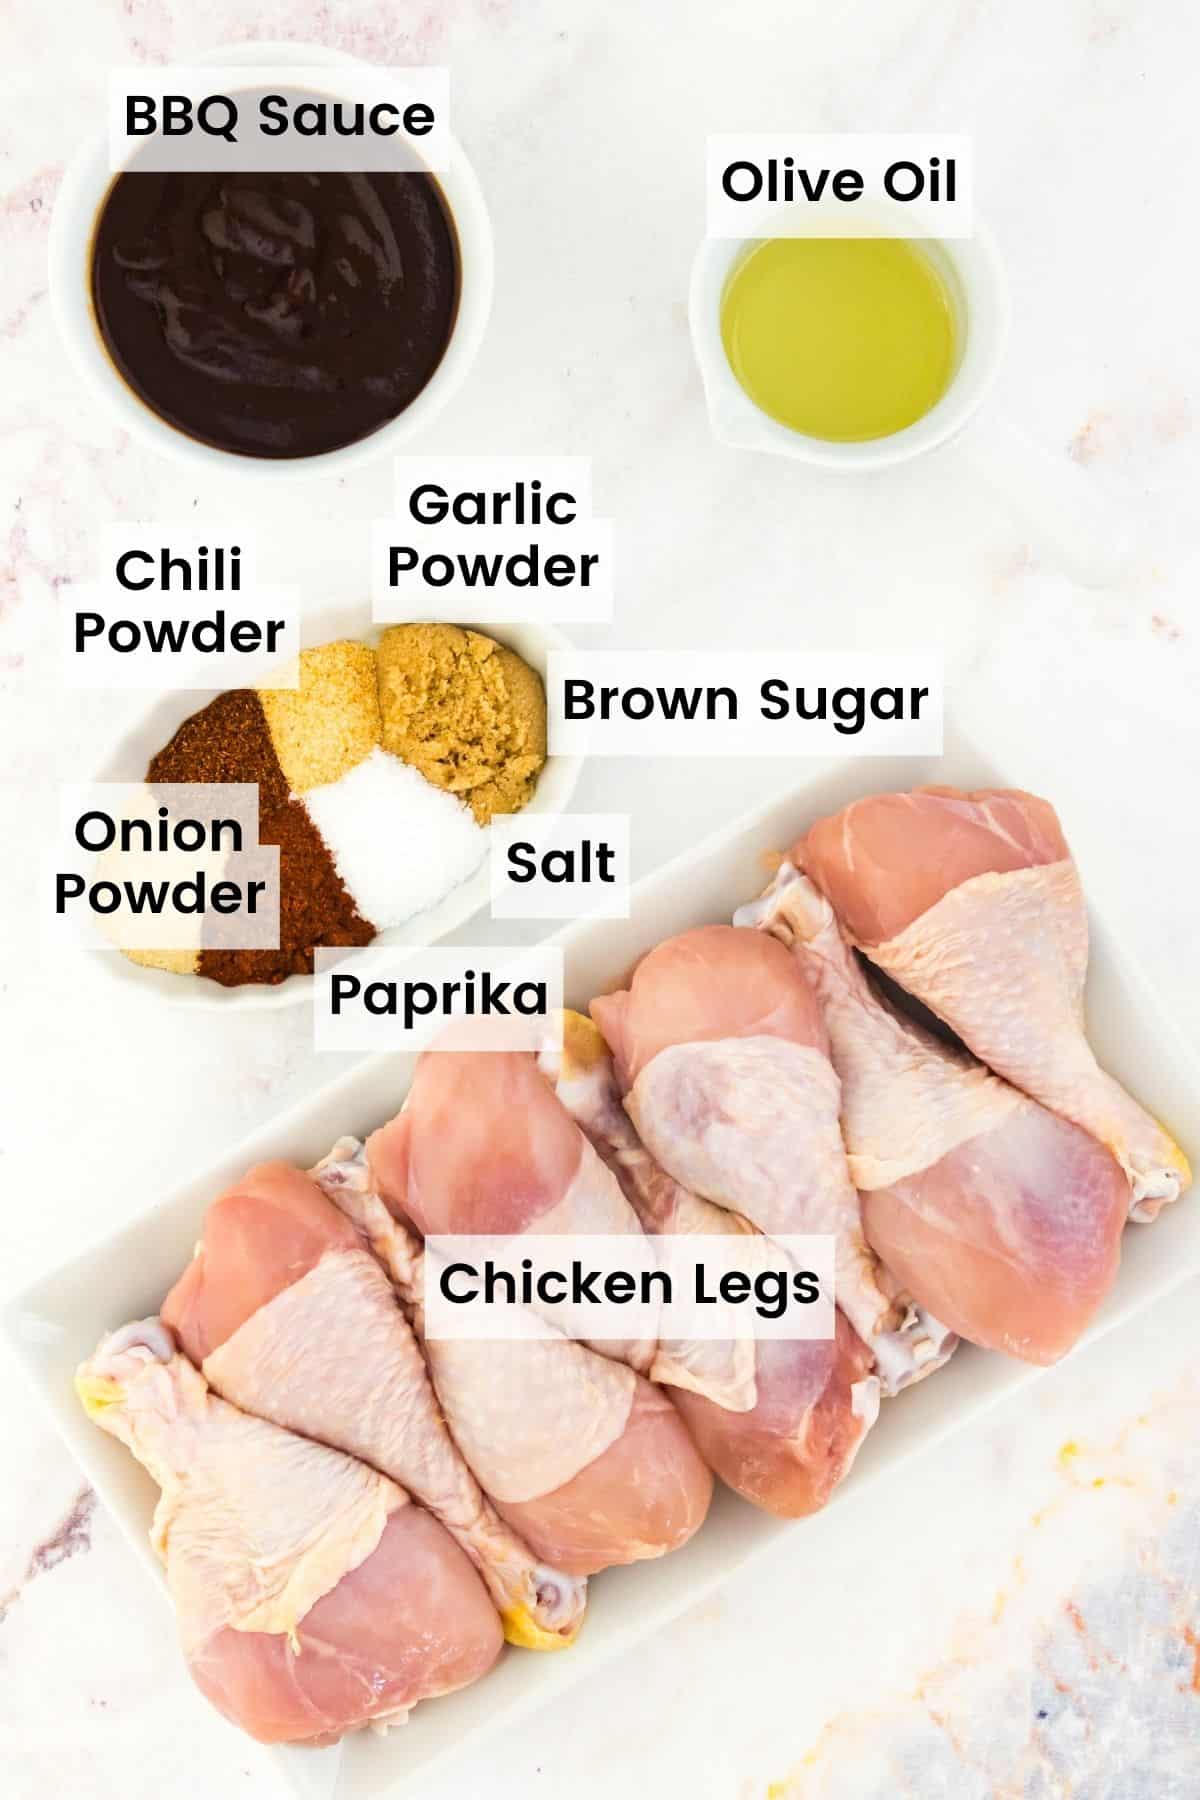 The ingredients for air fryer bbq chicken legs are shown with text labels including chicken legs, spices, bbq sauce, and oil.